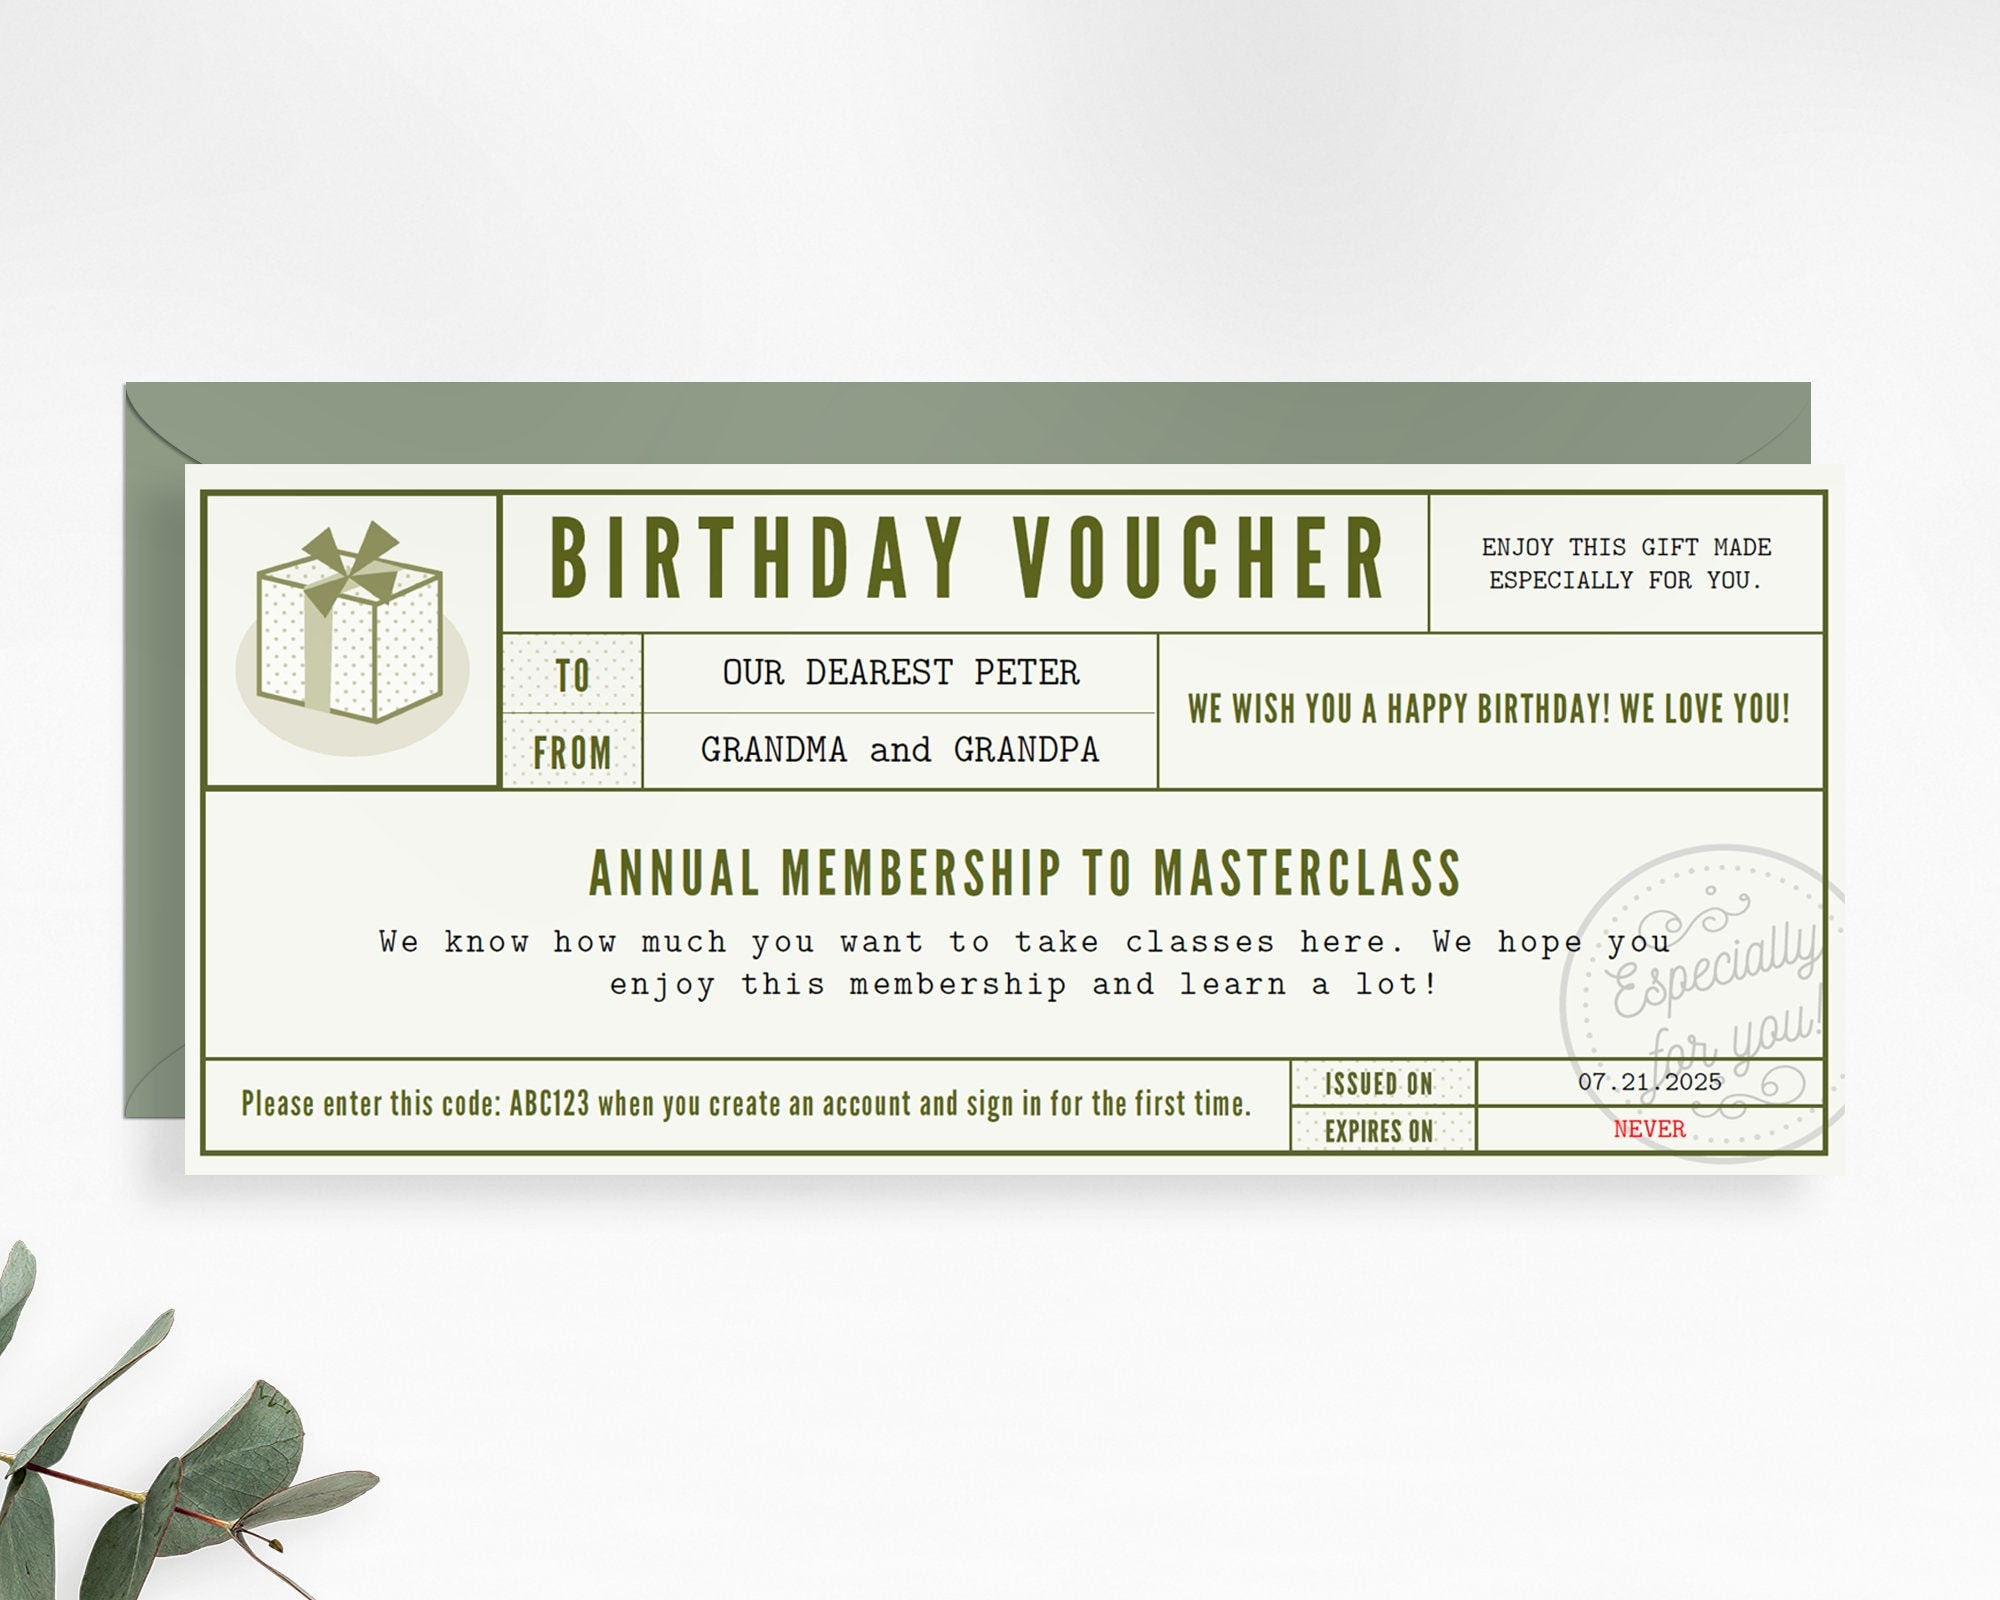 Birthday Gift Voucher / Gift Certificate Template in PDF / 10 X  In This Entitles The Bearer To Template Certificate